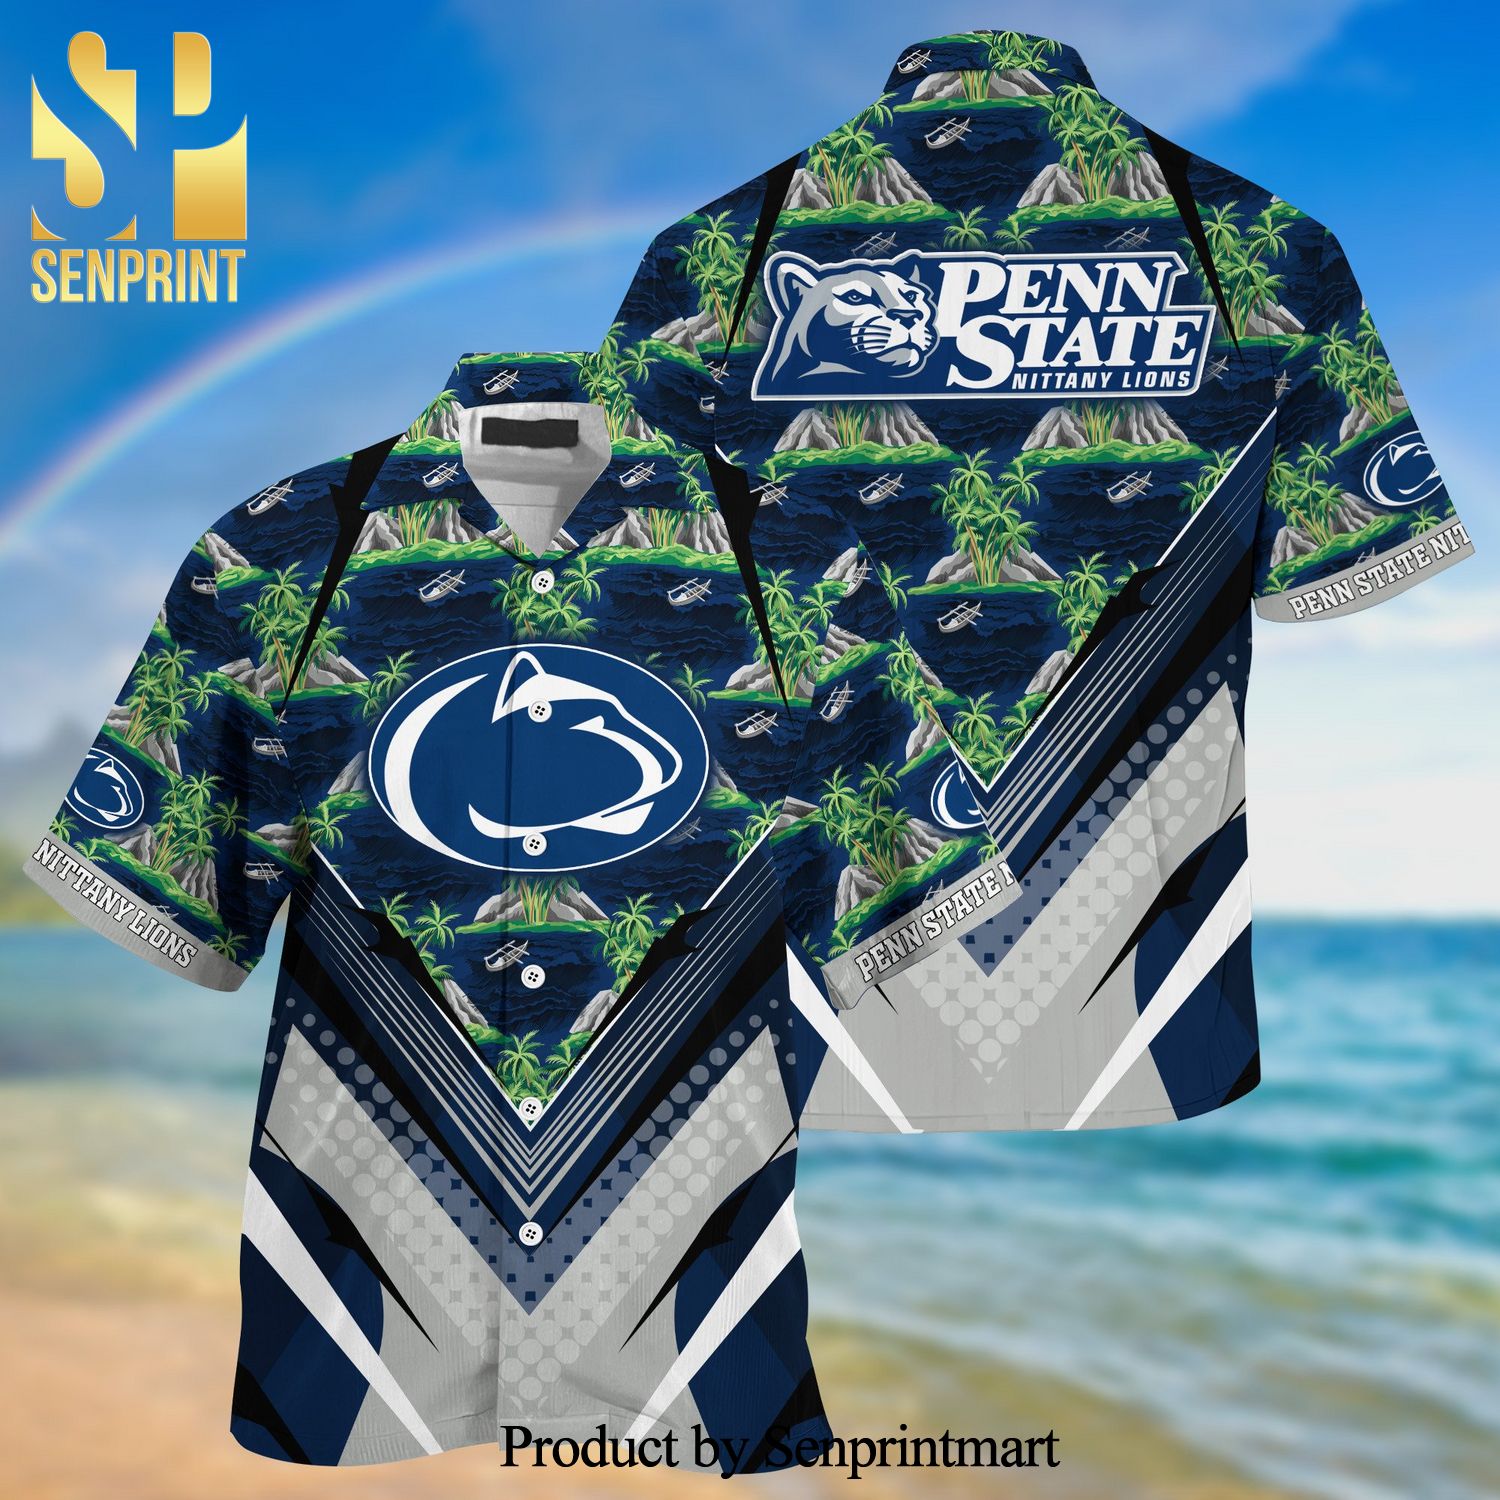 Penn State Nittany Lions Summer Hawaiian Shirt And Shorts For Sports Fans This Season